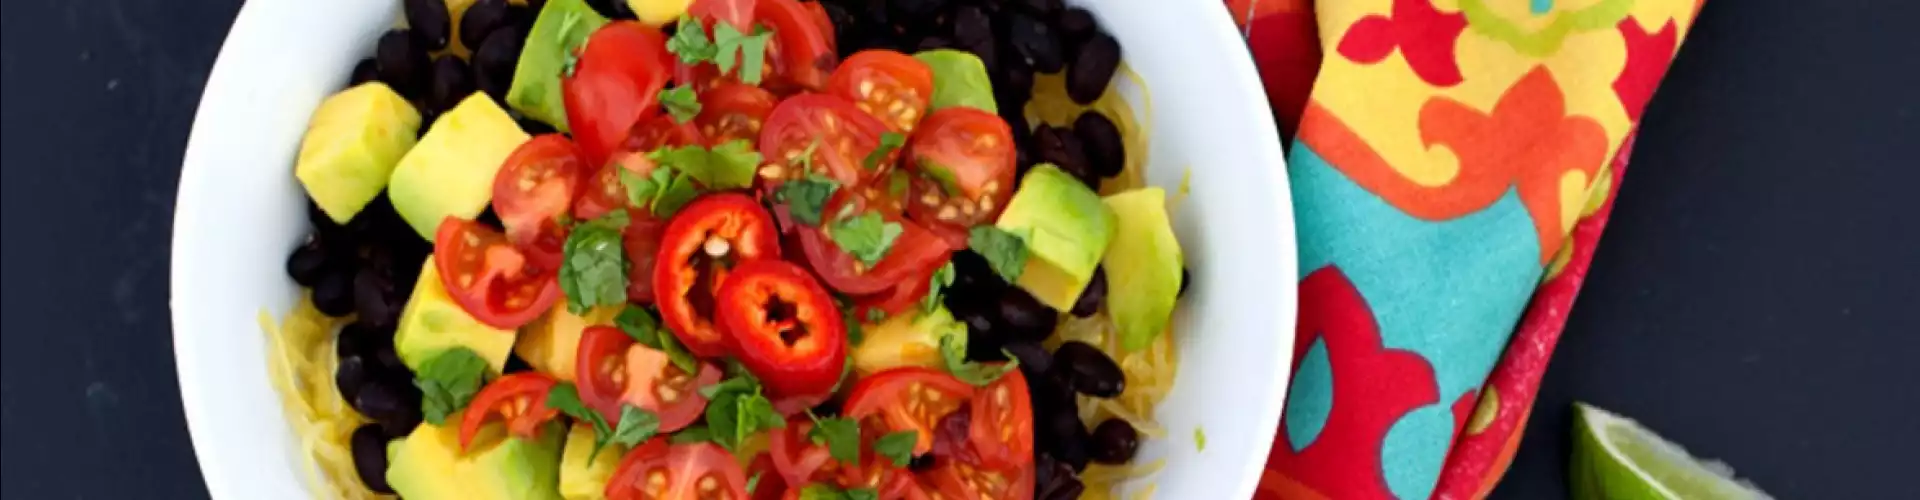 Preventing Blood Sugar Spikes: Plan a day of vegan meals